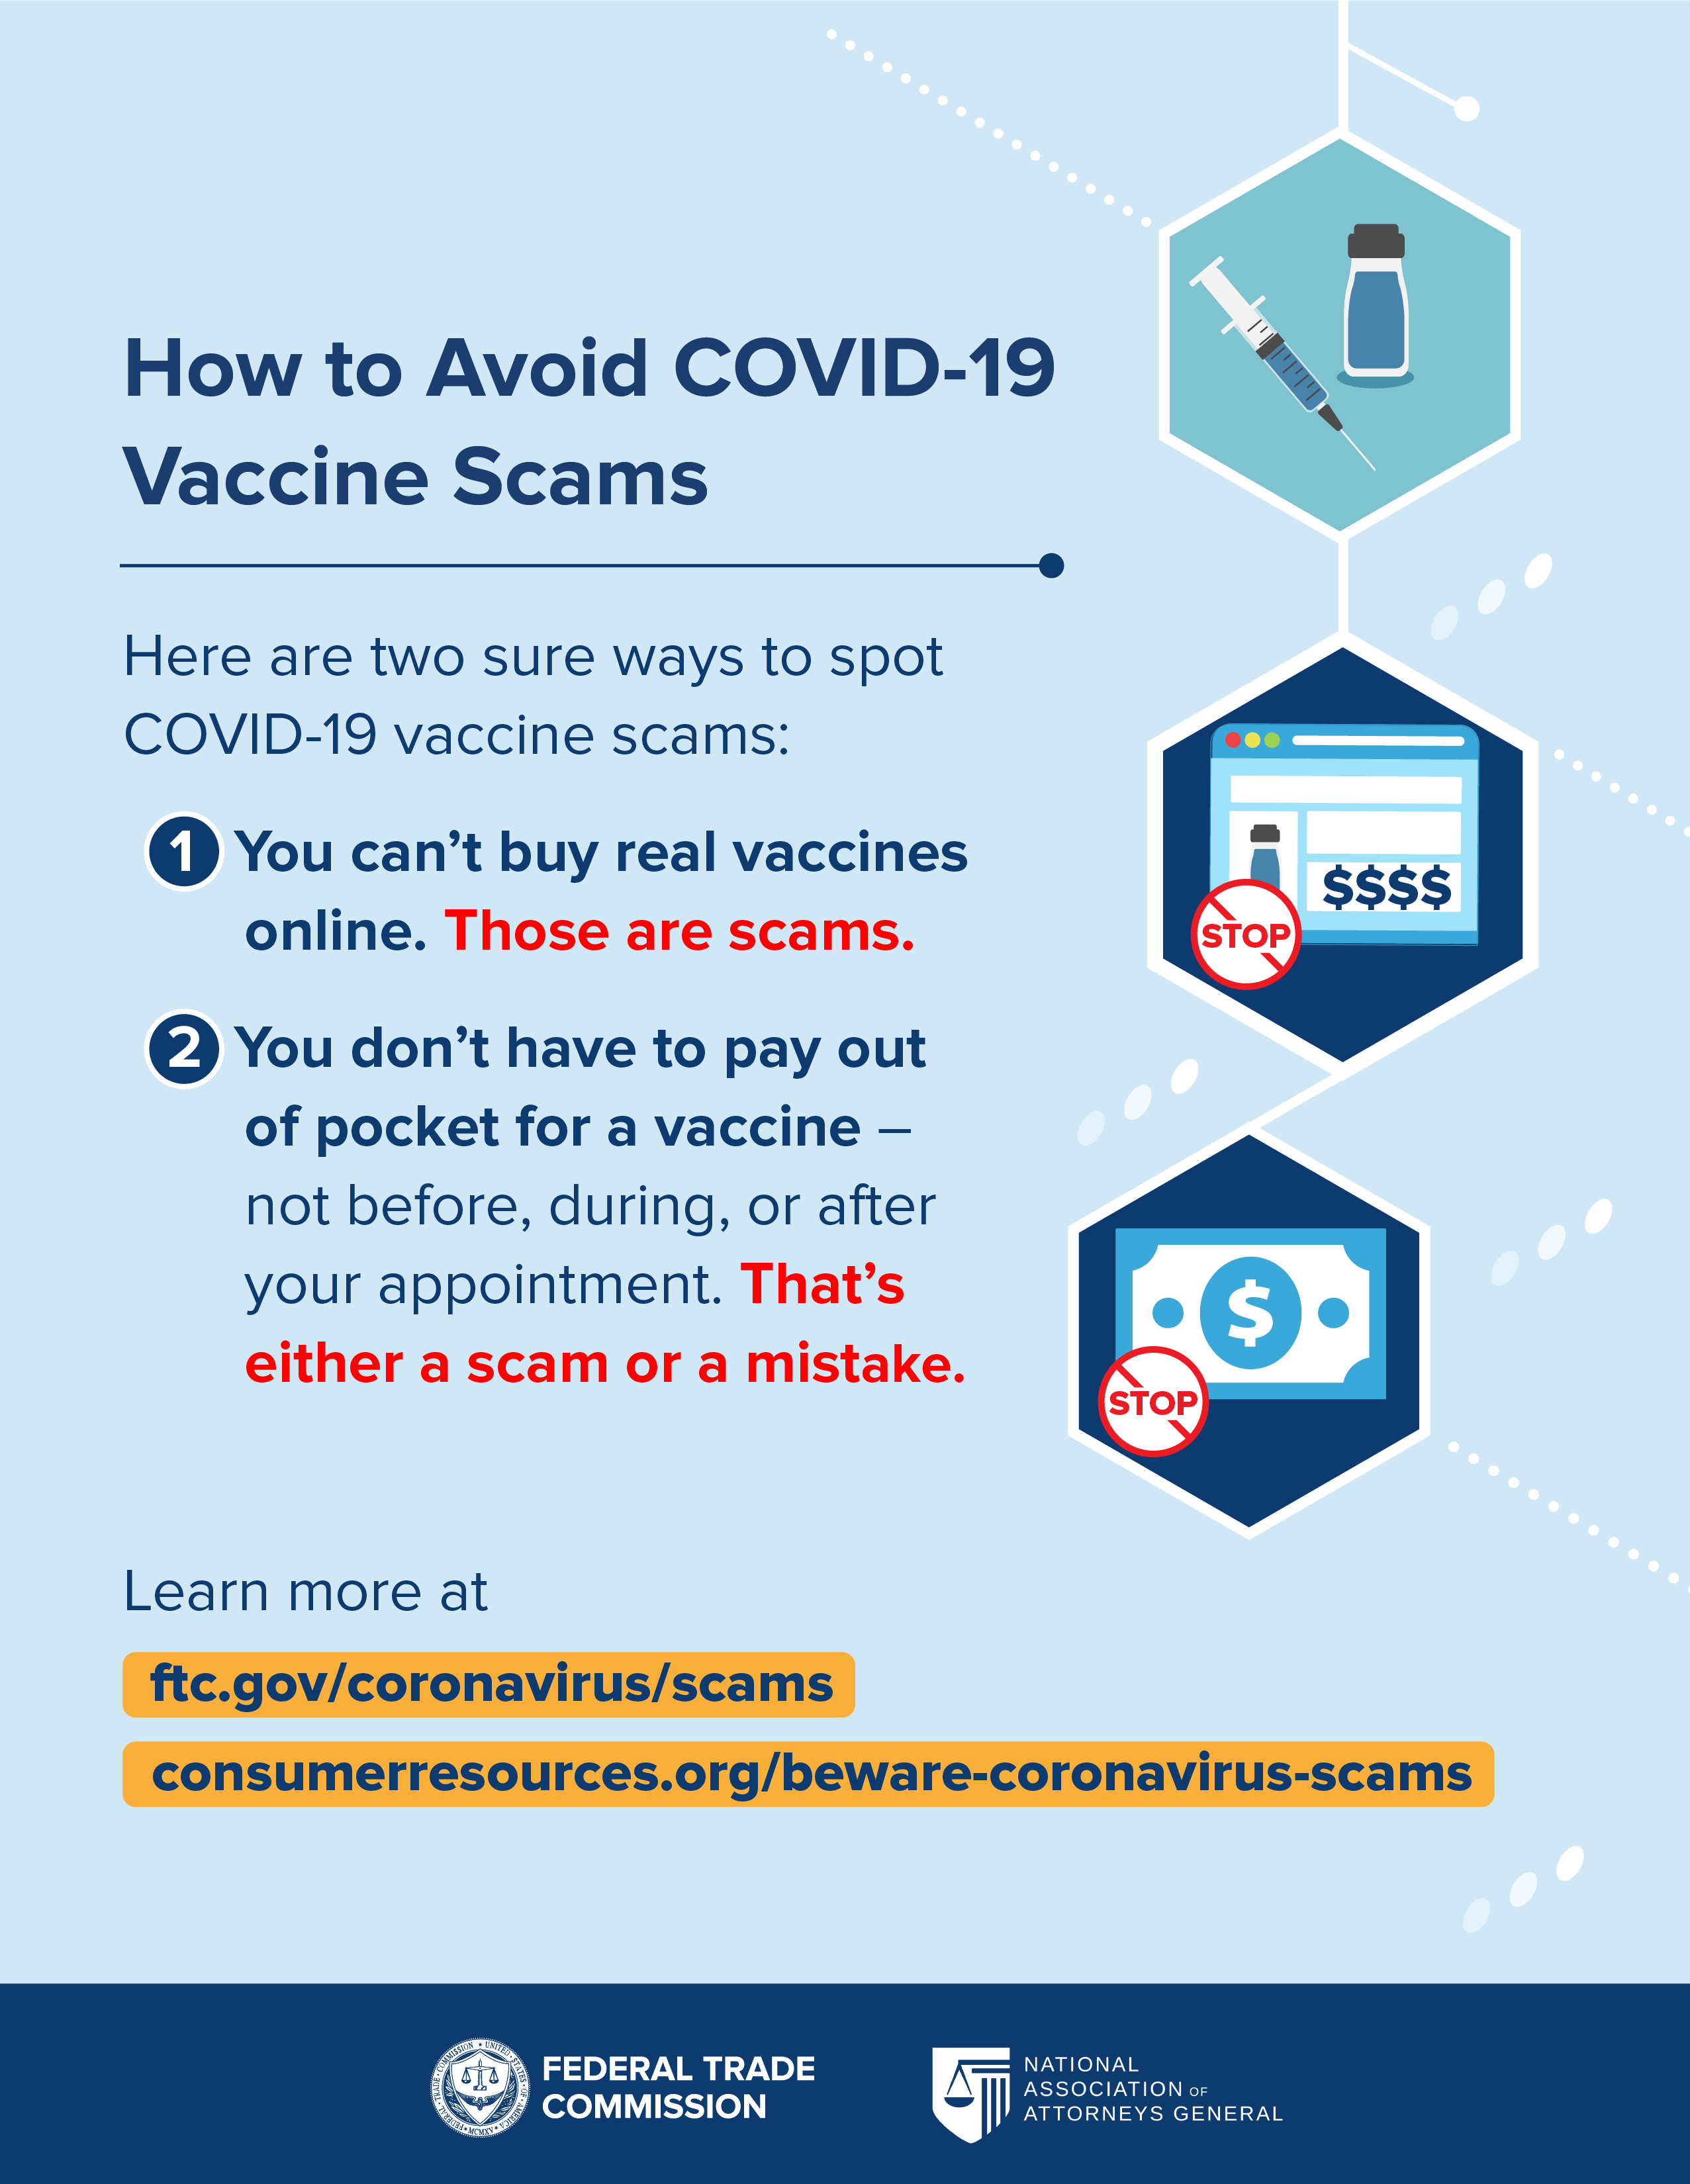 two sure ways to spot covid-19 vaccine scams